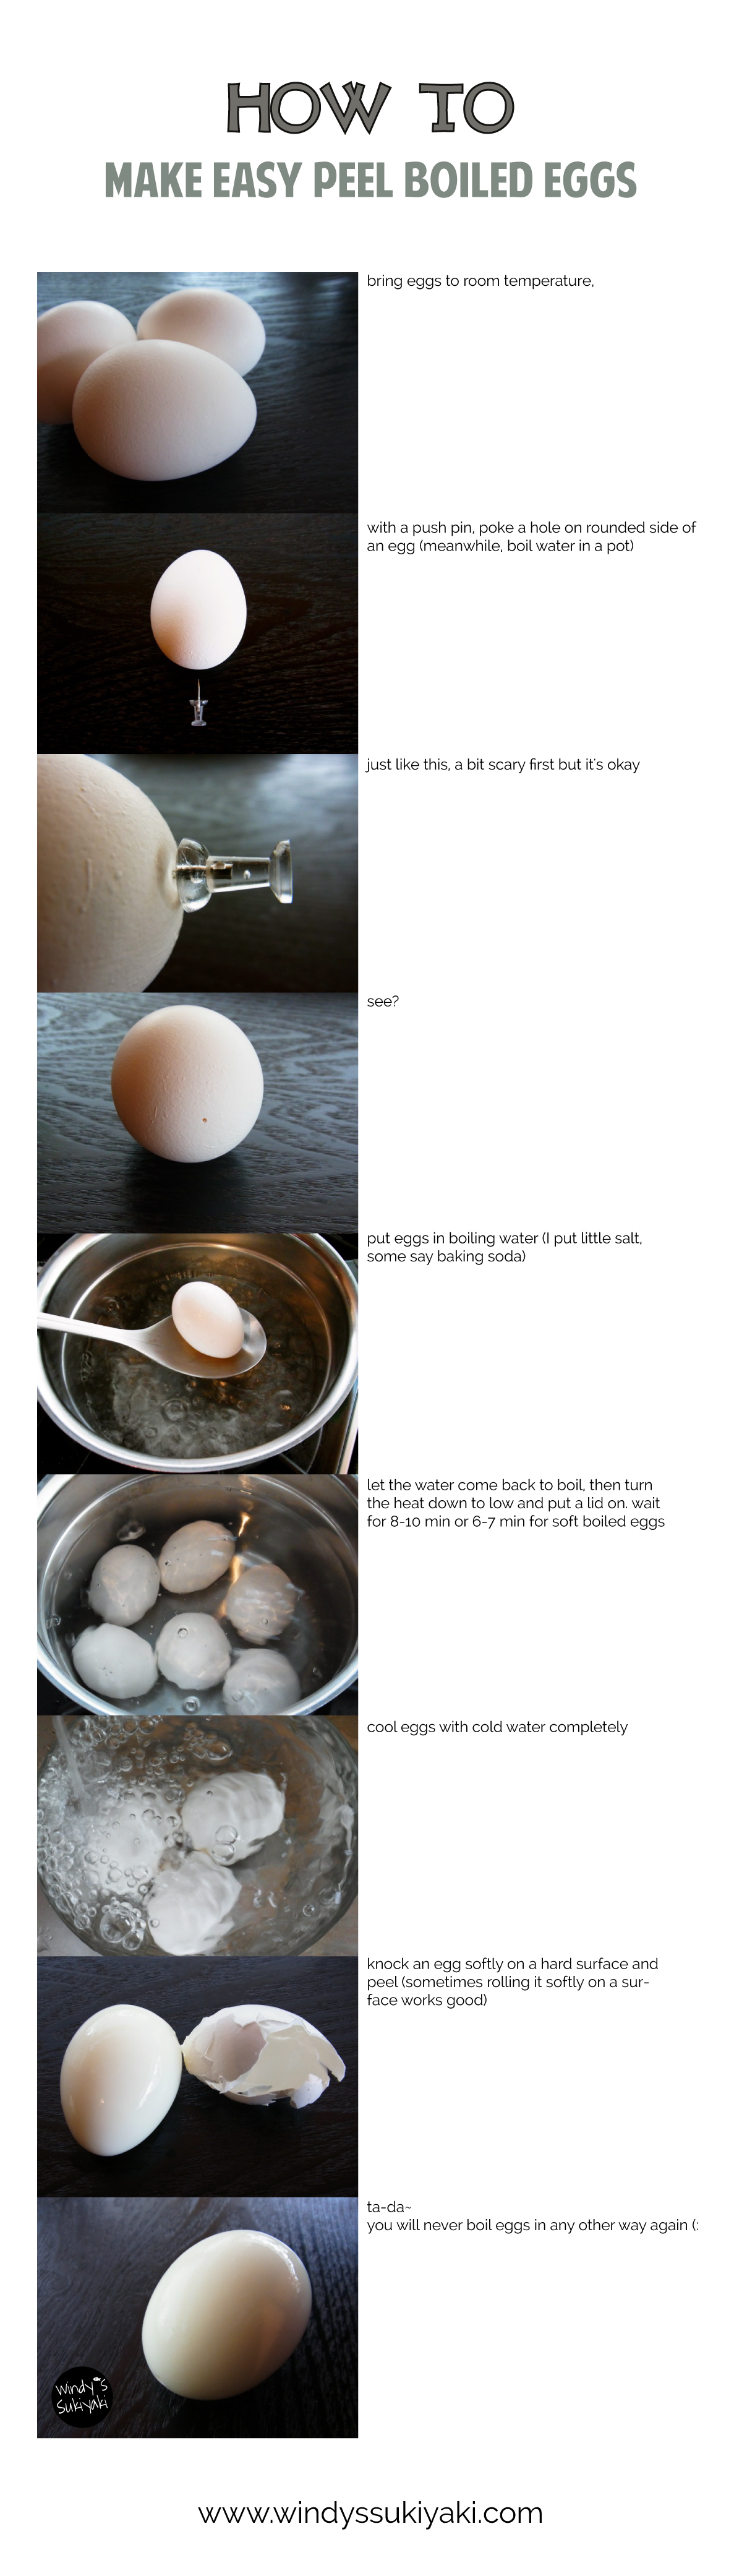 How to Soft Boil and Peel Eggs - The BakerMama